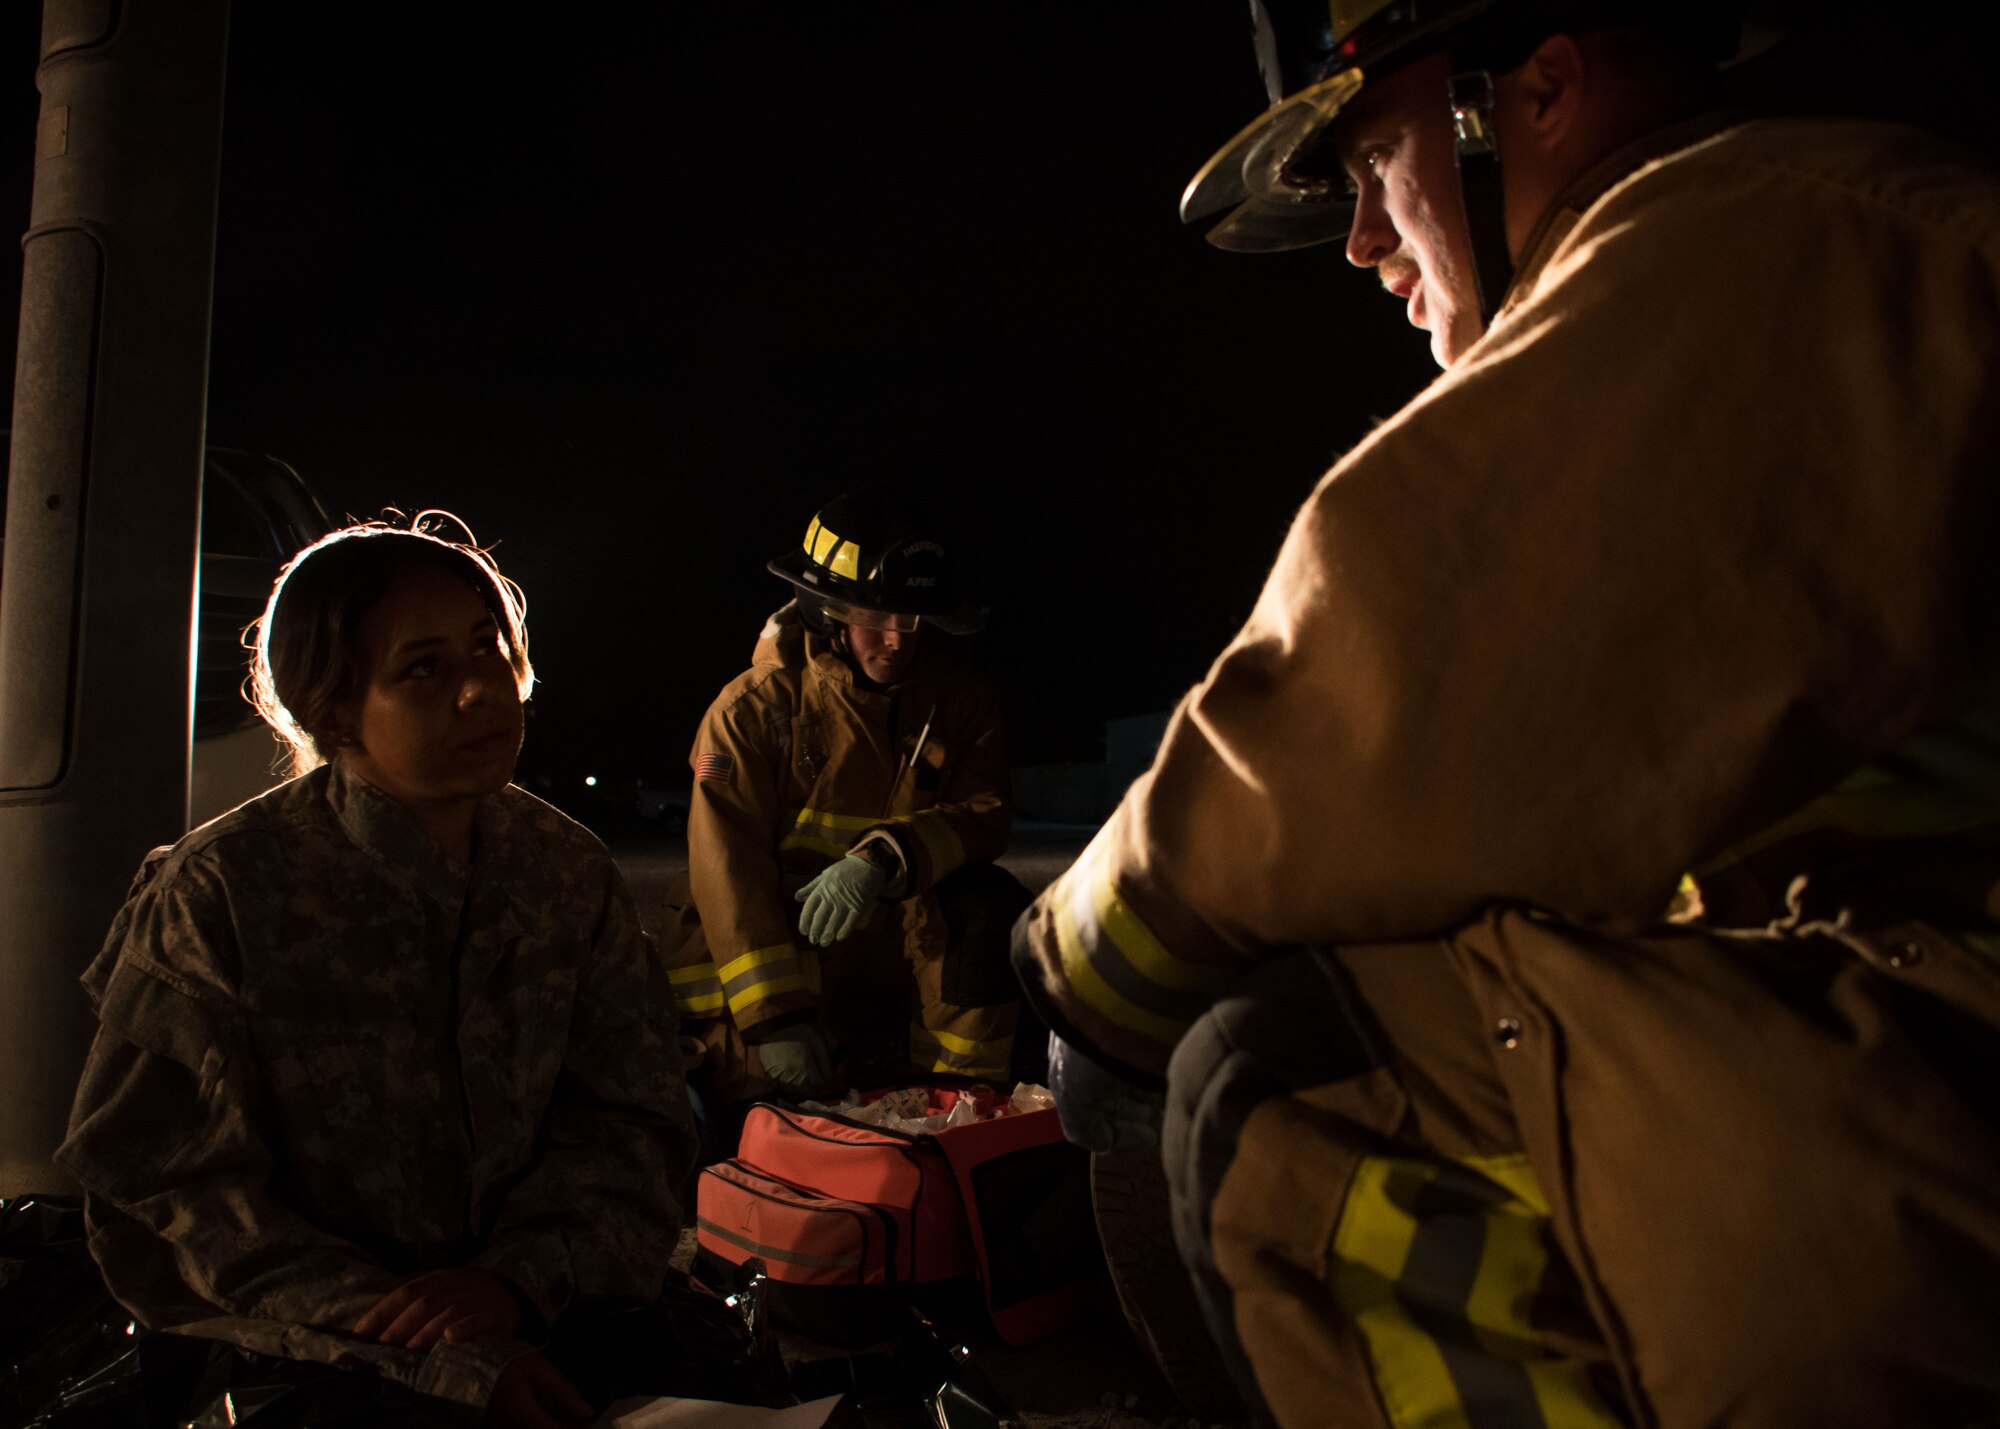 Senior Airman David Barker, a 386th Expeditionary Civil Engineer Squadron firefighter, center, and Senior Airman Phillip Osborne, a 386th ECES firefighter, right, talk with Senior Airman Jessica Mendoza, a 386th ECES firefighter, left, during a drill at an undisclosed location in Southwest Asia March 10, 2017. Mendoza played the role of a passenger who was confused and frantic after being involved in a car accident. (U.S. Air Force photo/Senior Airman Andrew Park)